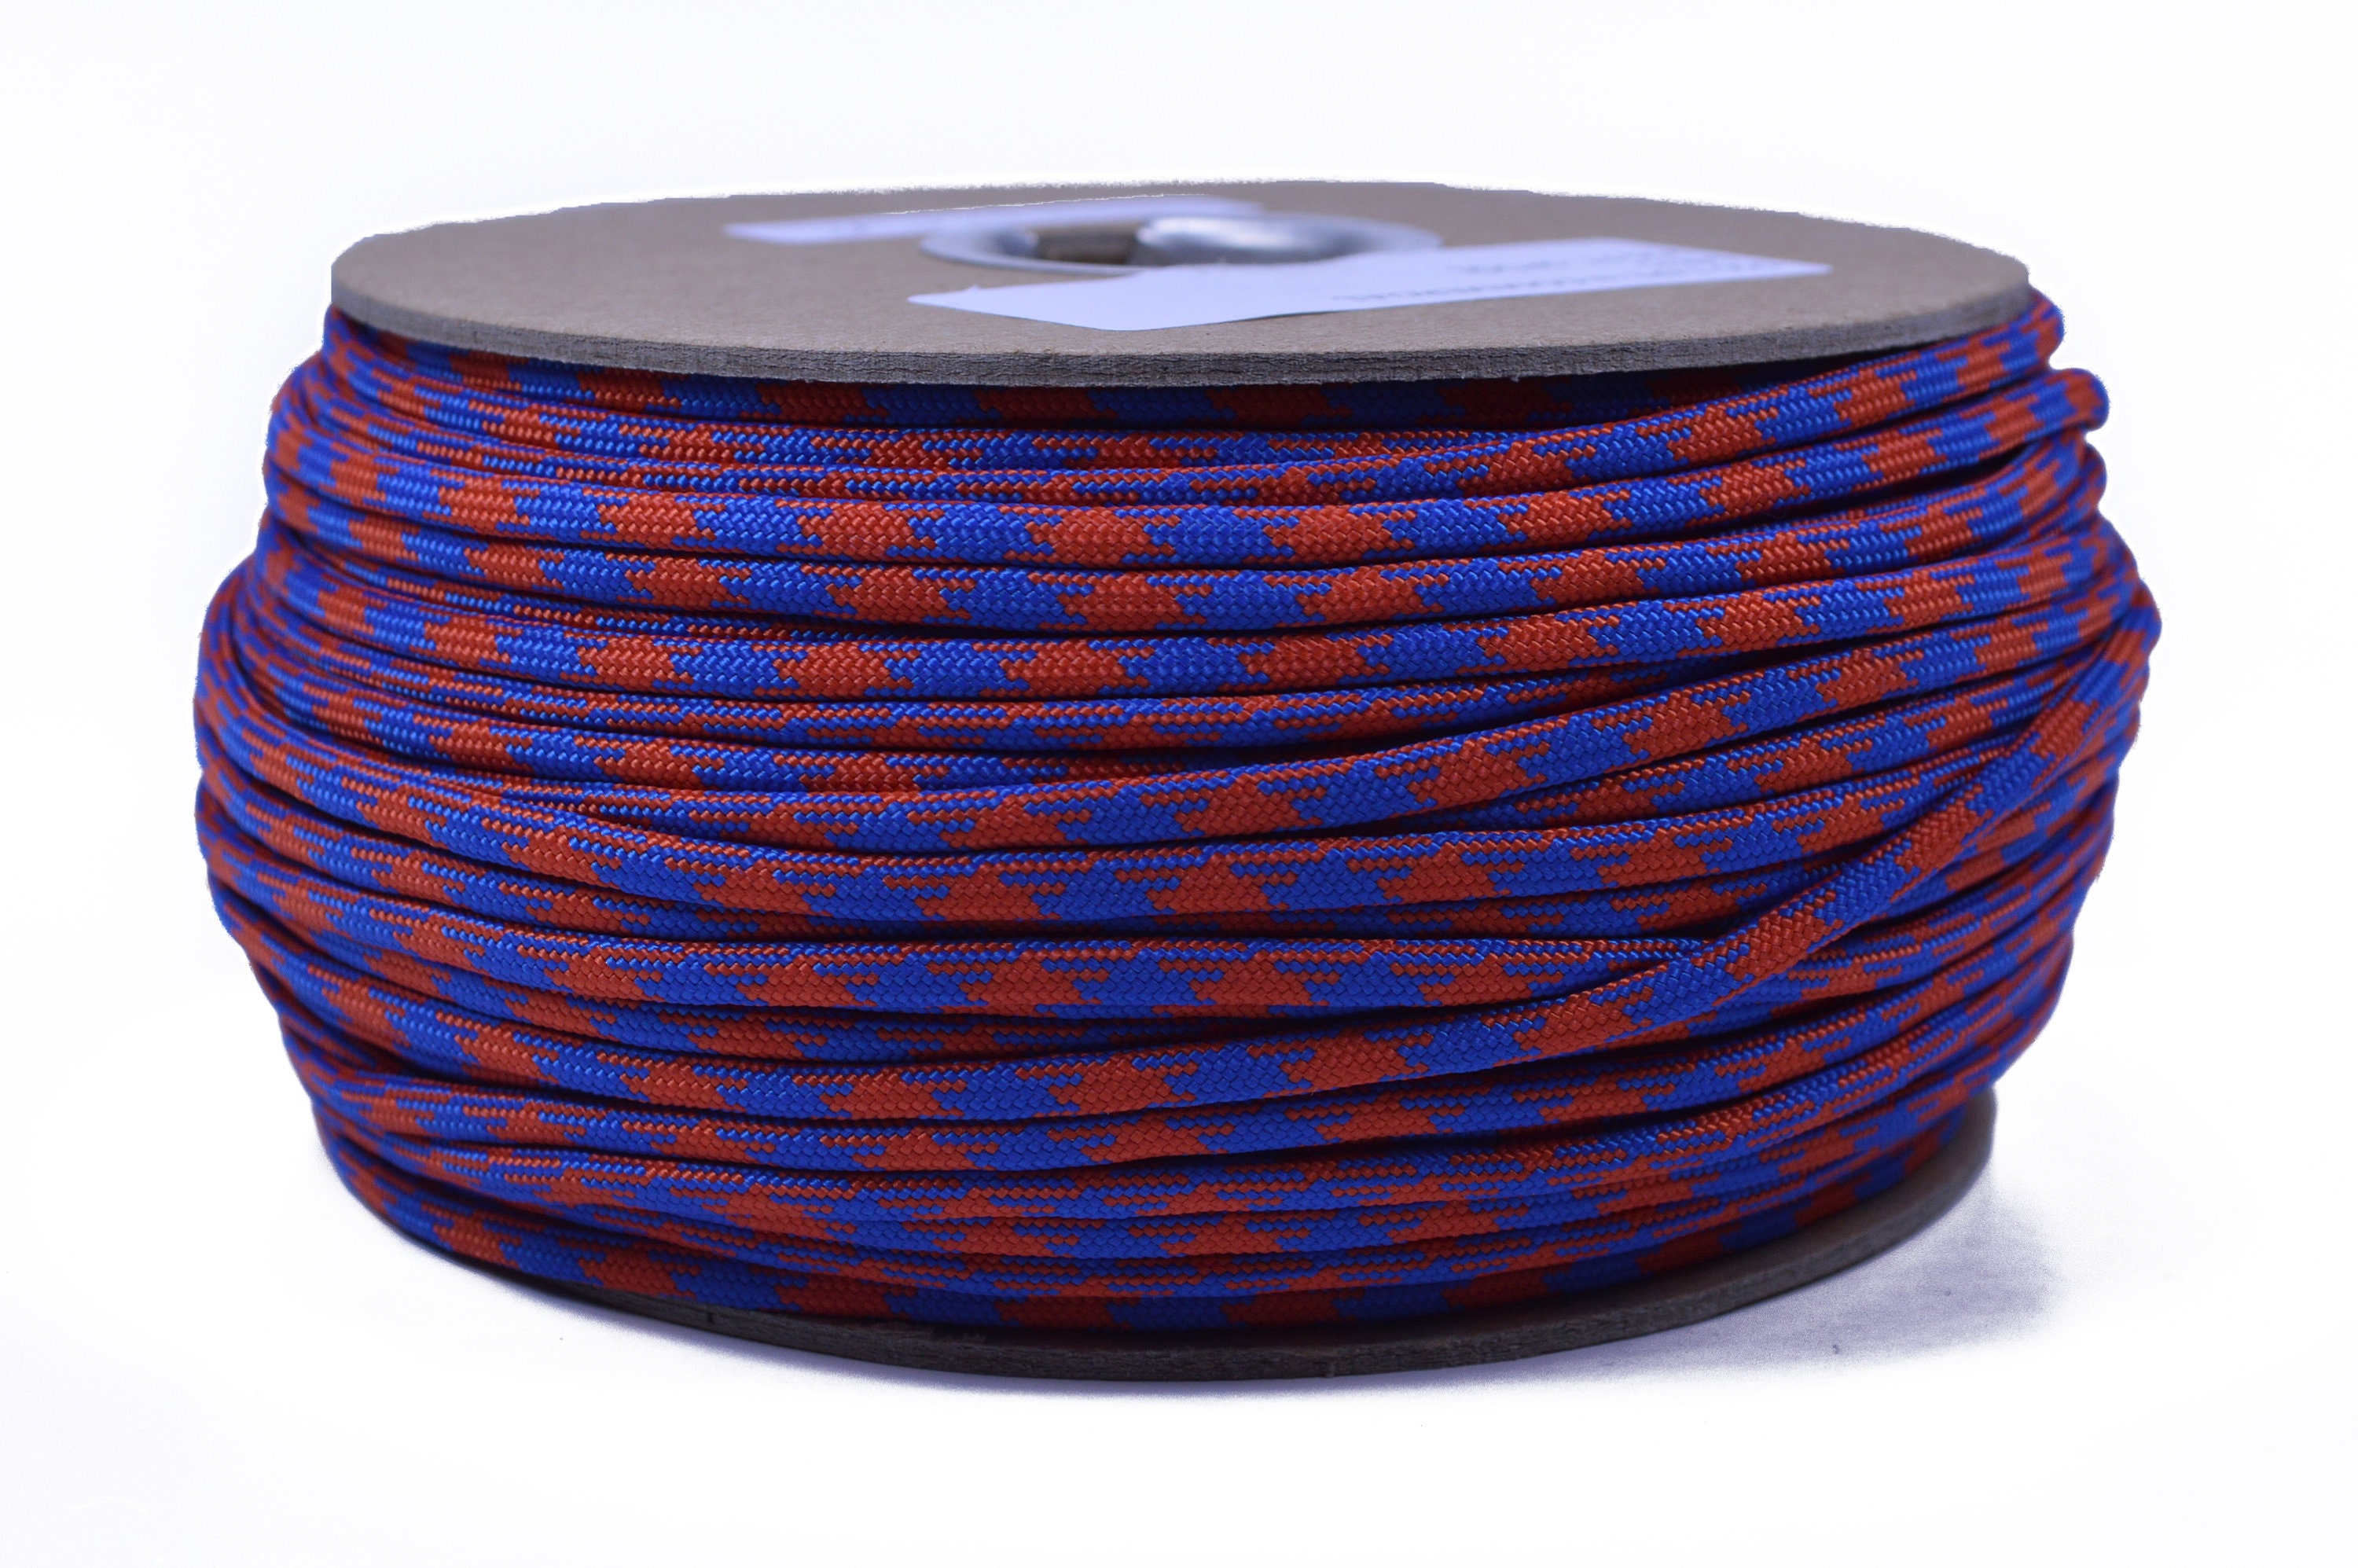 Mets 250 Foot Spool 550 Type III 7 Strand Commercial Paracord for